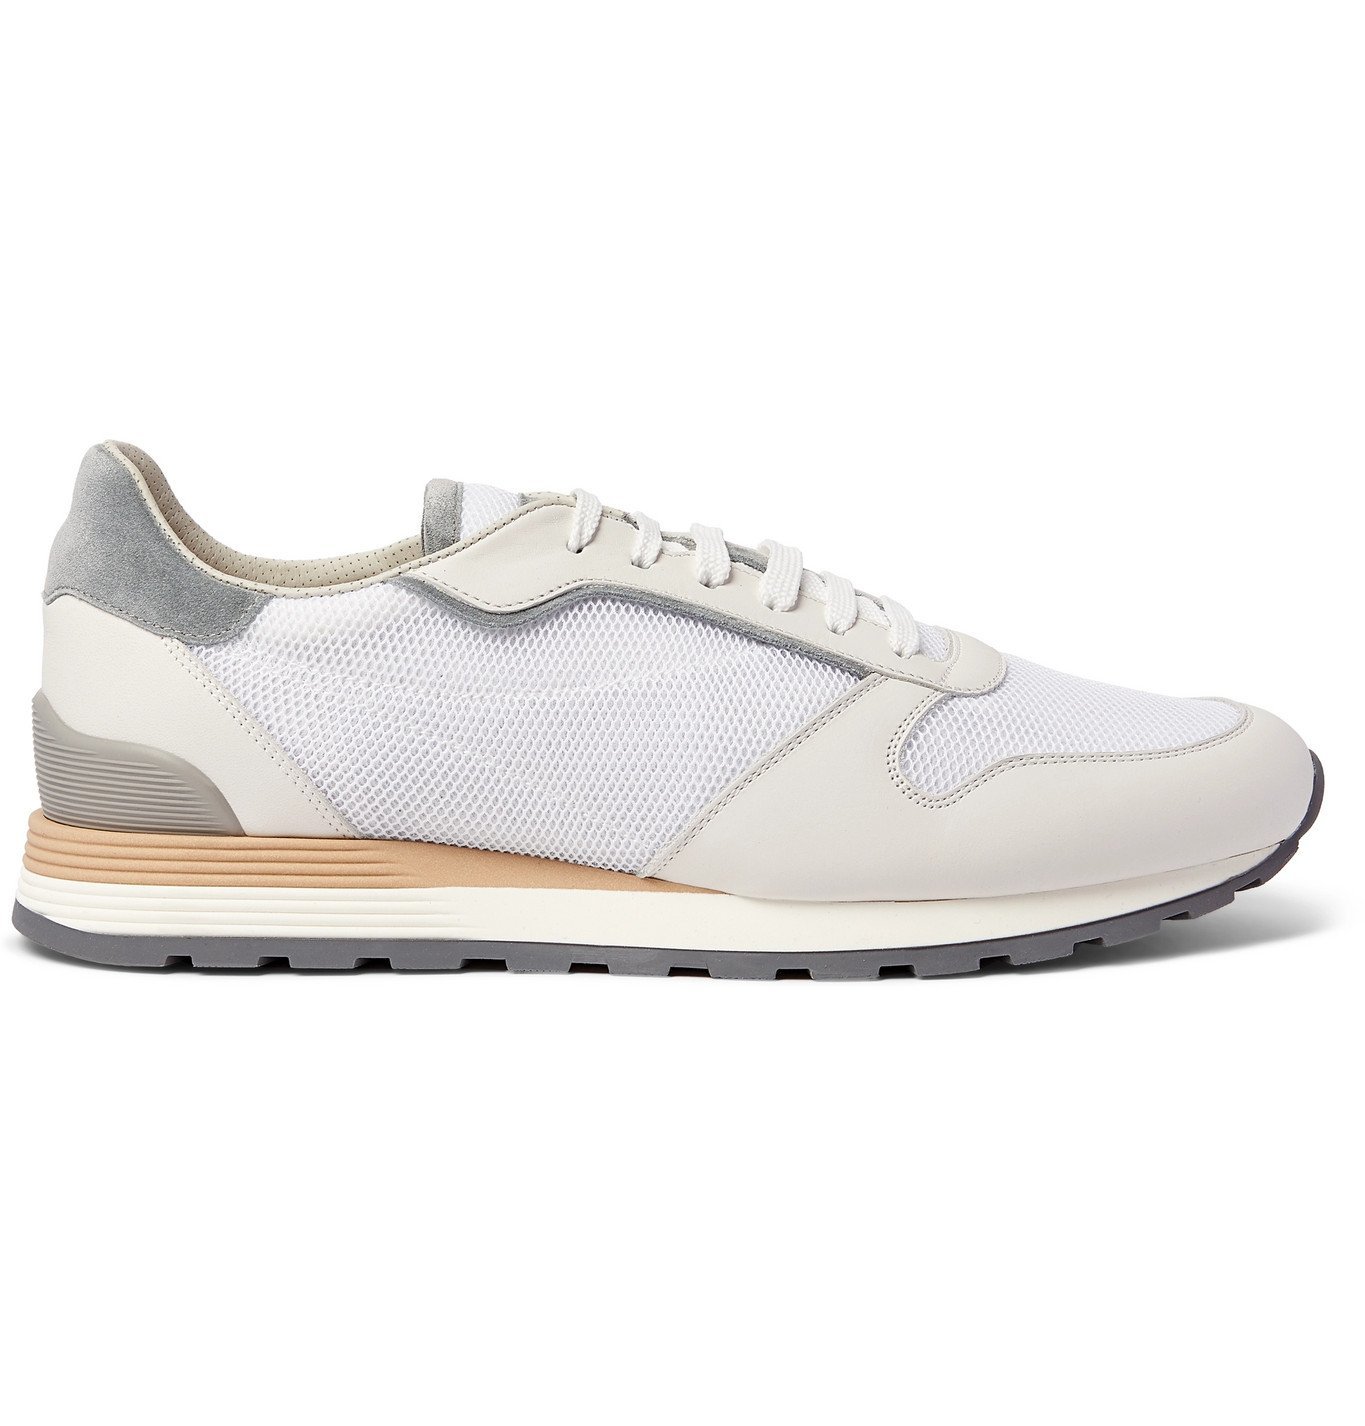 Brunello Cucinelli - Suede-Trimmed Mesh and Leather Sneakers - White ...